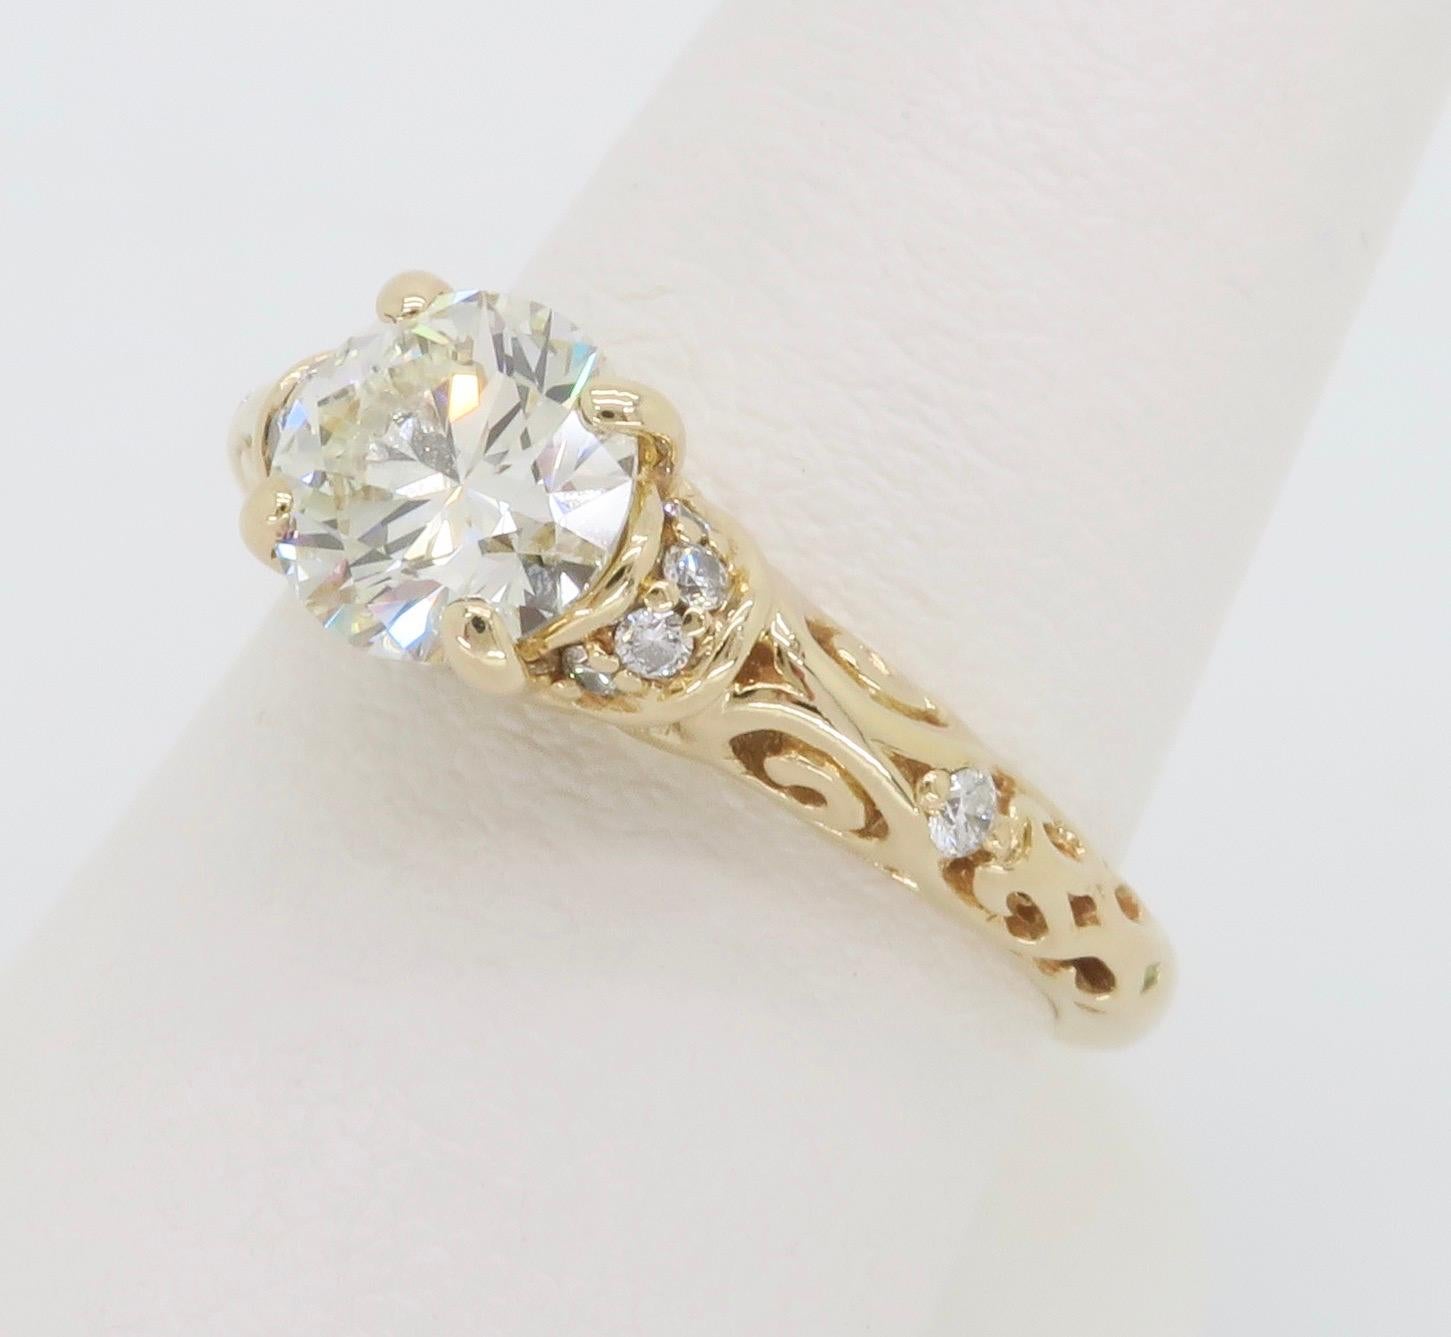 flawless engagement rings